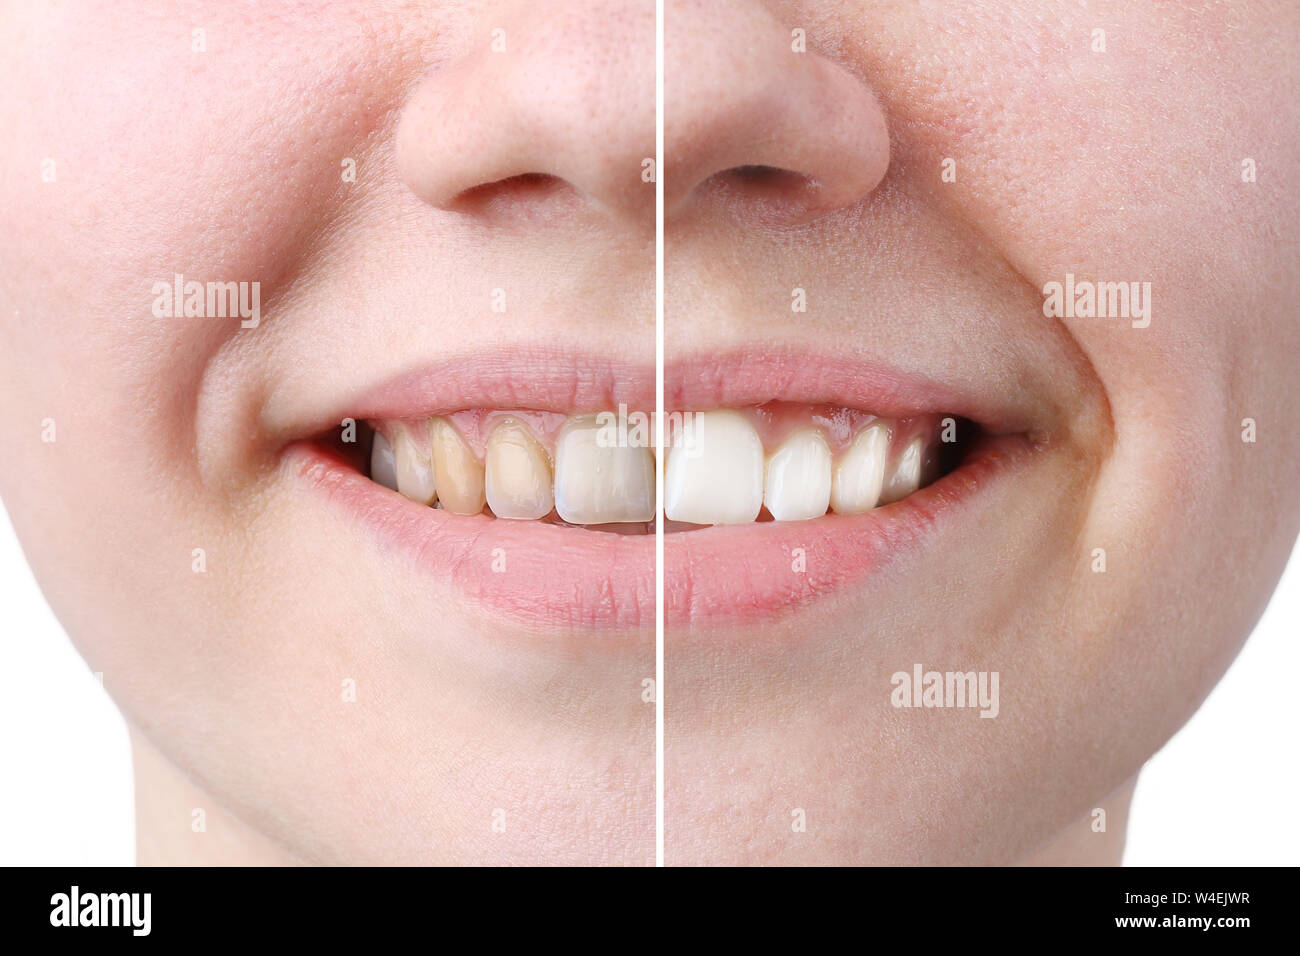 whitening or bleaching treatment ,before and after ,woman teeth and smile, close up, isolated on white background. Stock Photo